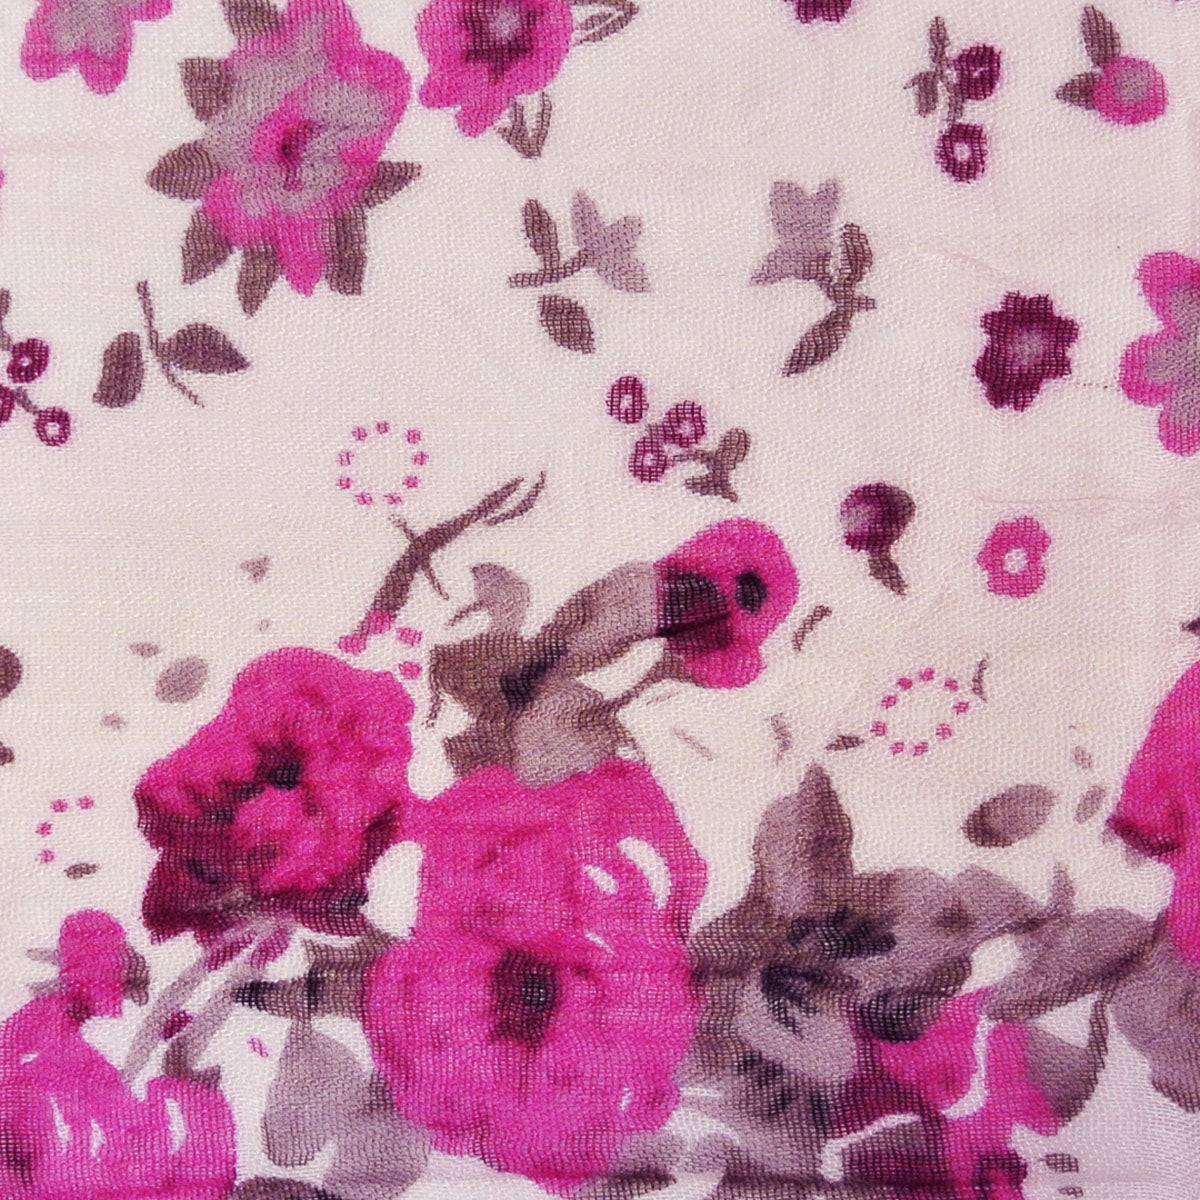 Wrapables Viscose Floral Print Scarf